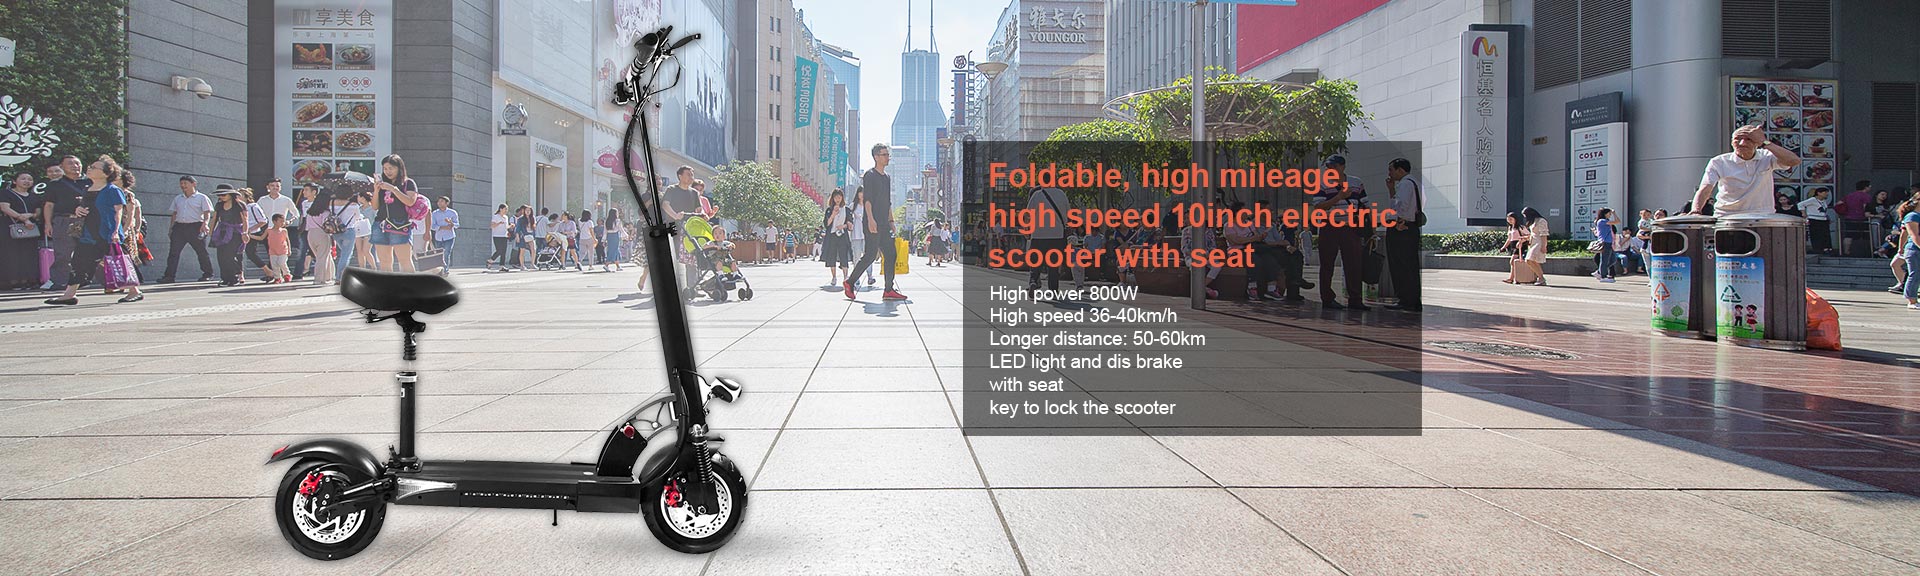 10inch long mileage Foldable Escooter